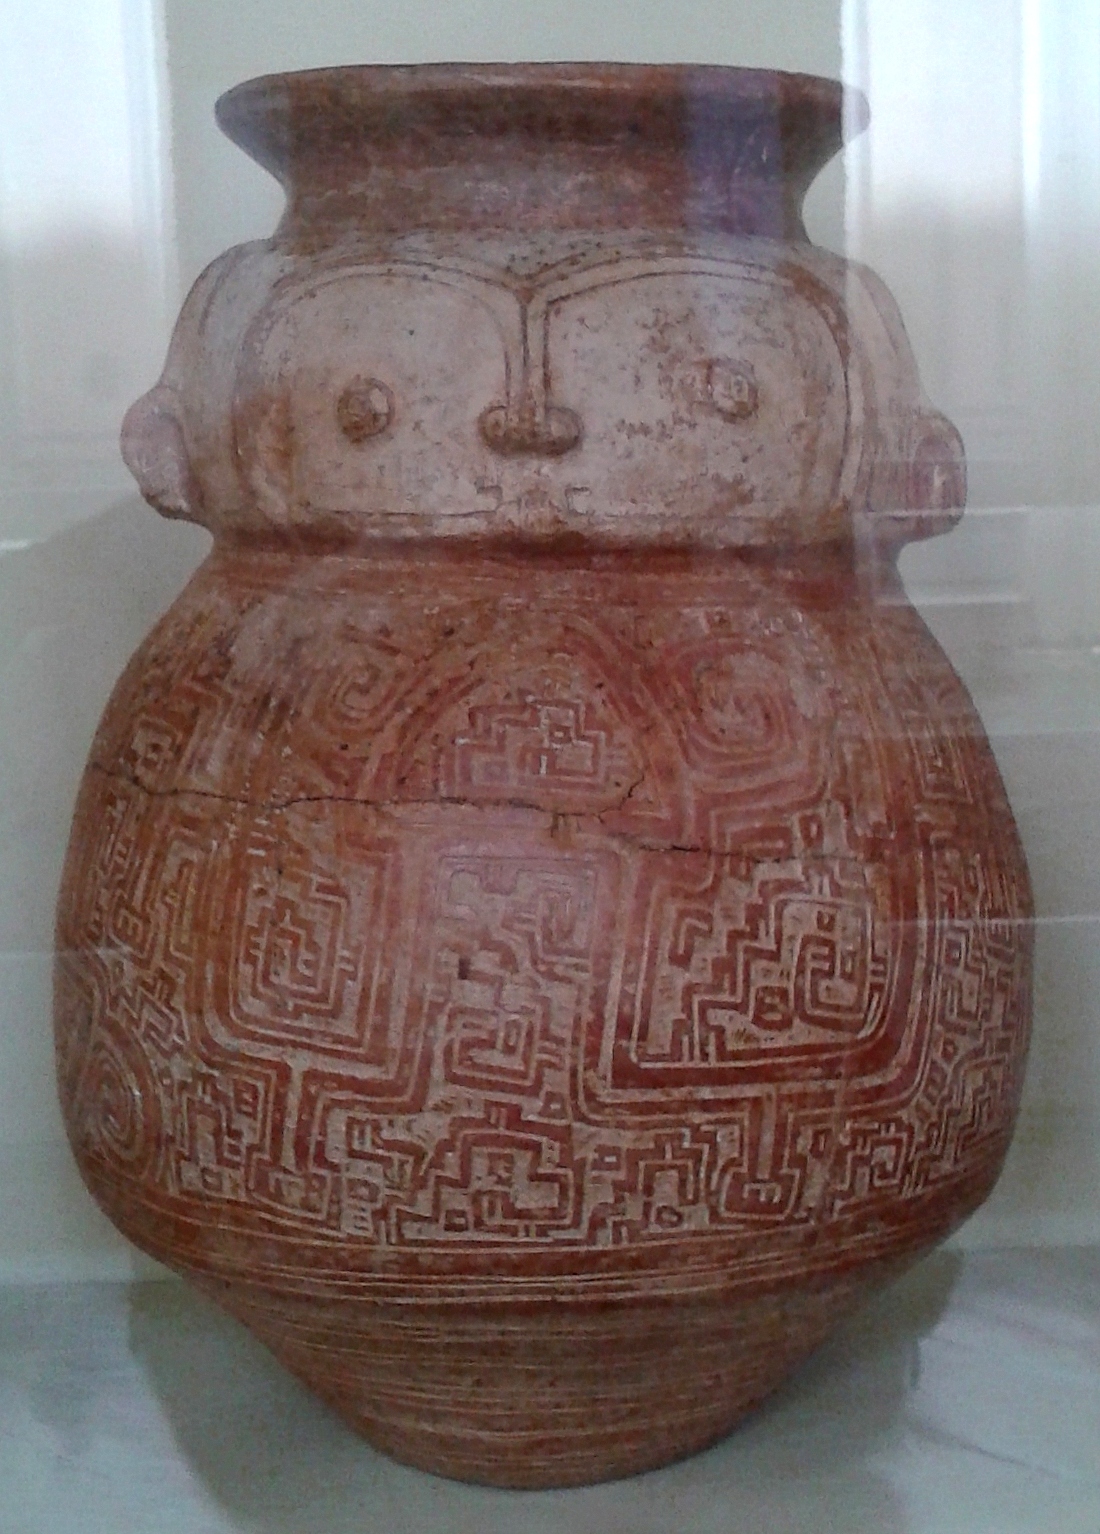 Marajoara culture. Anthropomorphic funerary urn by Unknown Artist - 400-1400 AD. National Museum of Brazil